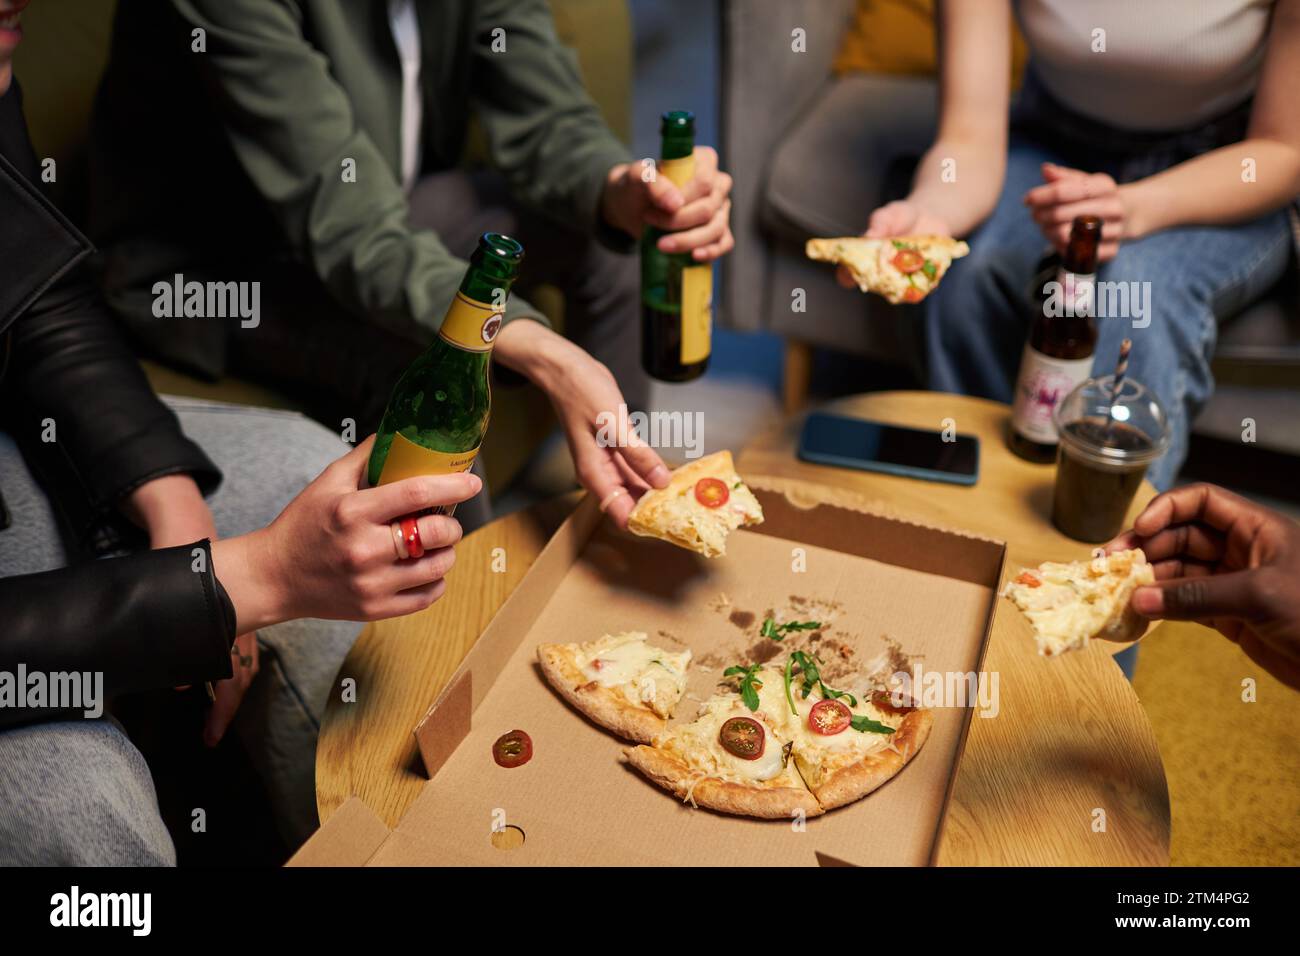 Friends Eating Pizza and Drinking Beer Stock Photo